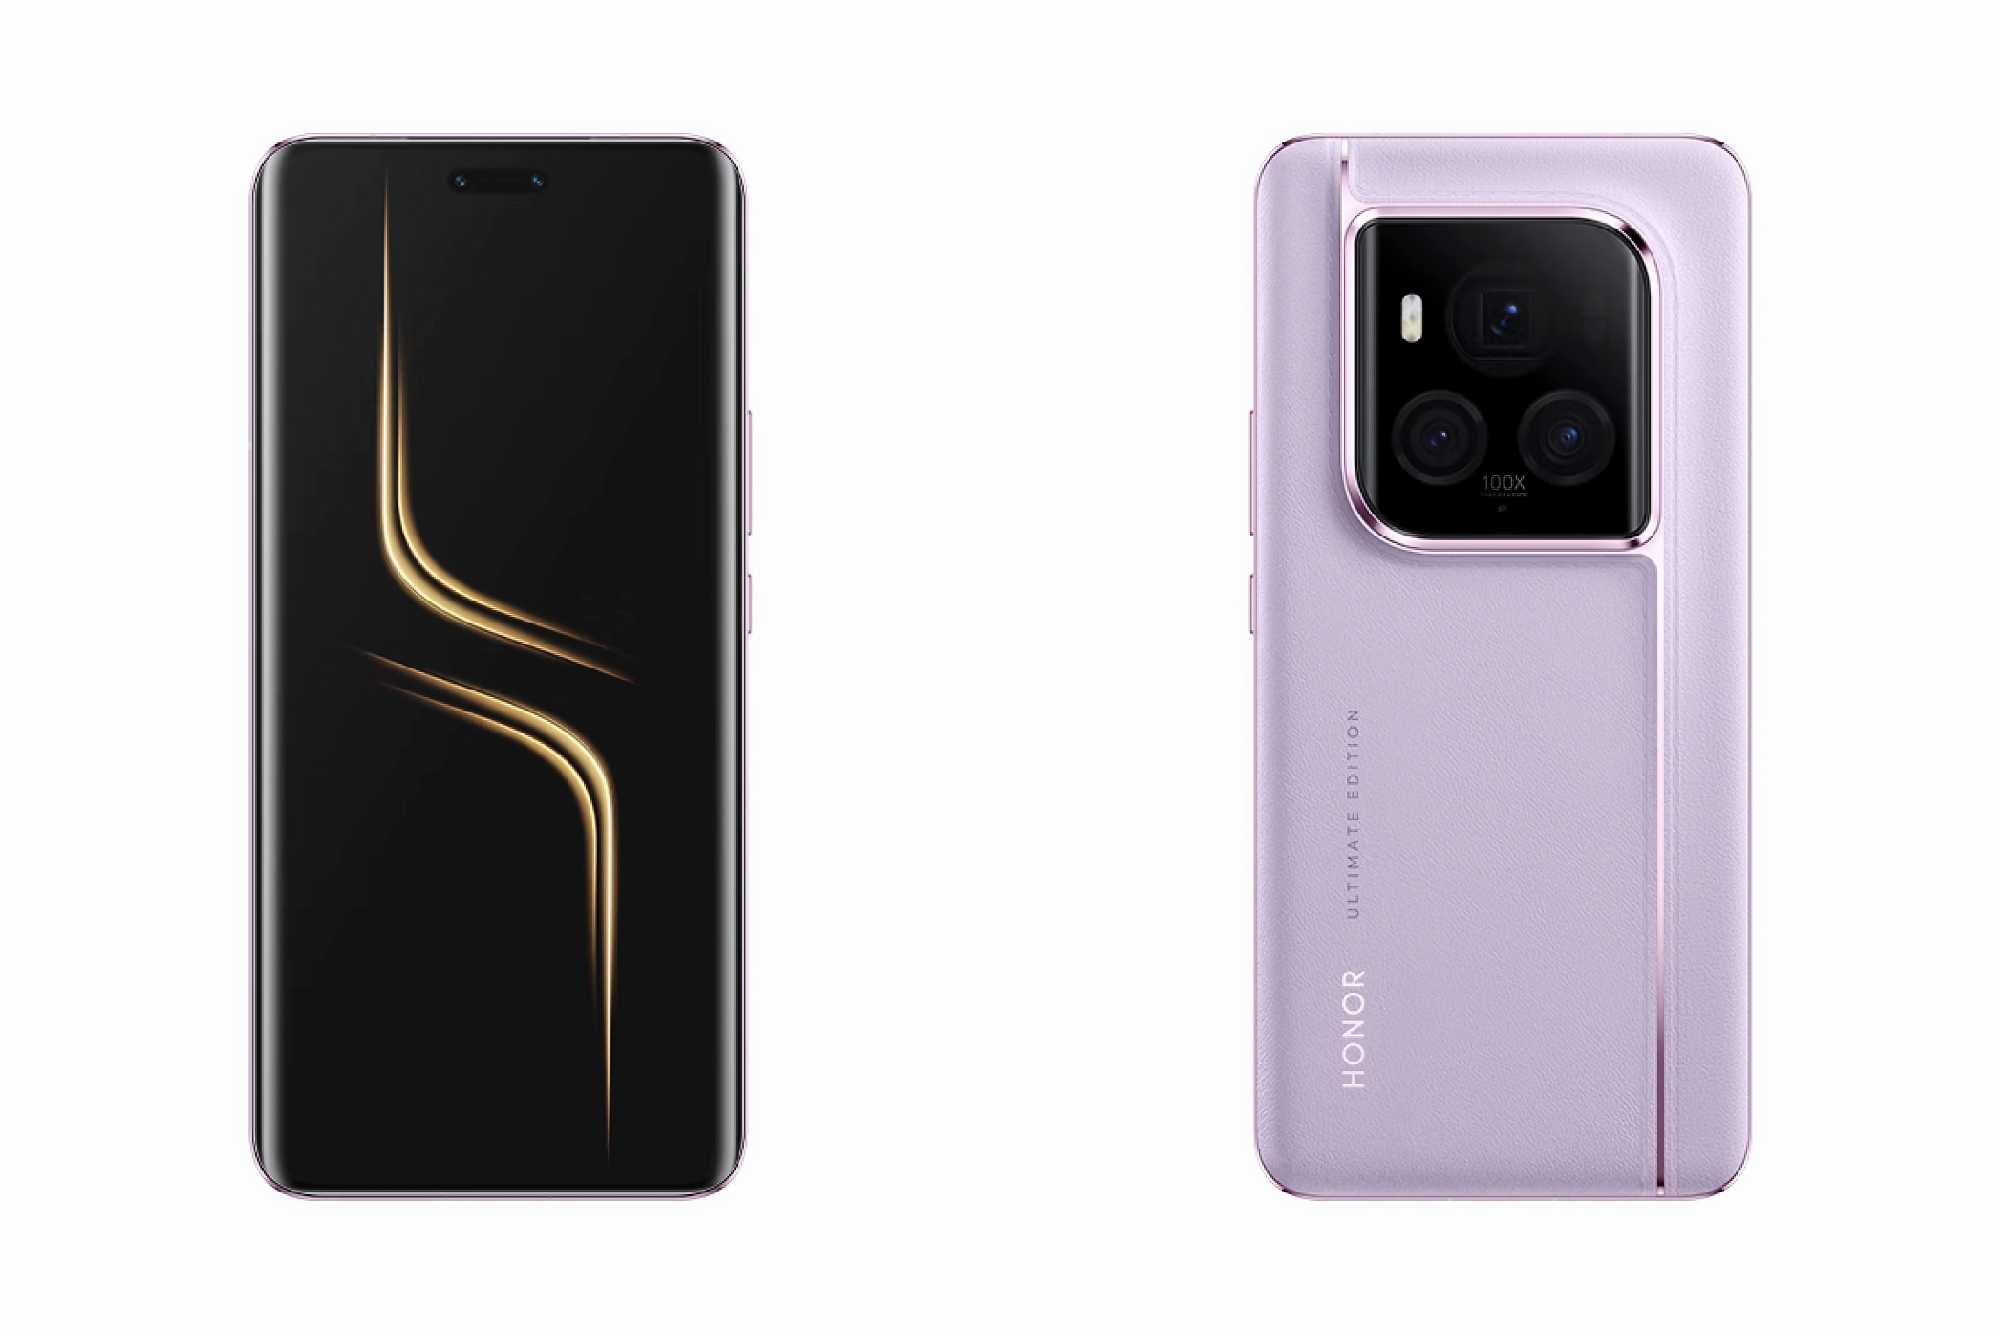 An insider has revealed high-quality press renders of the Honor Magic 6 Ultimate Edition, the smartphone can be seen from all angles